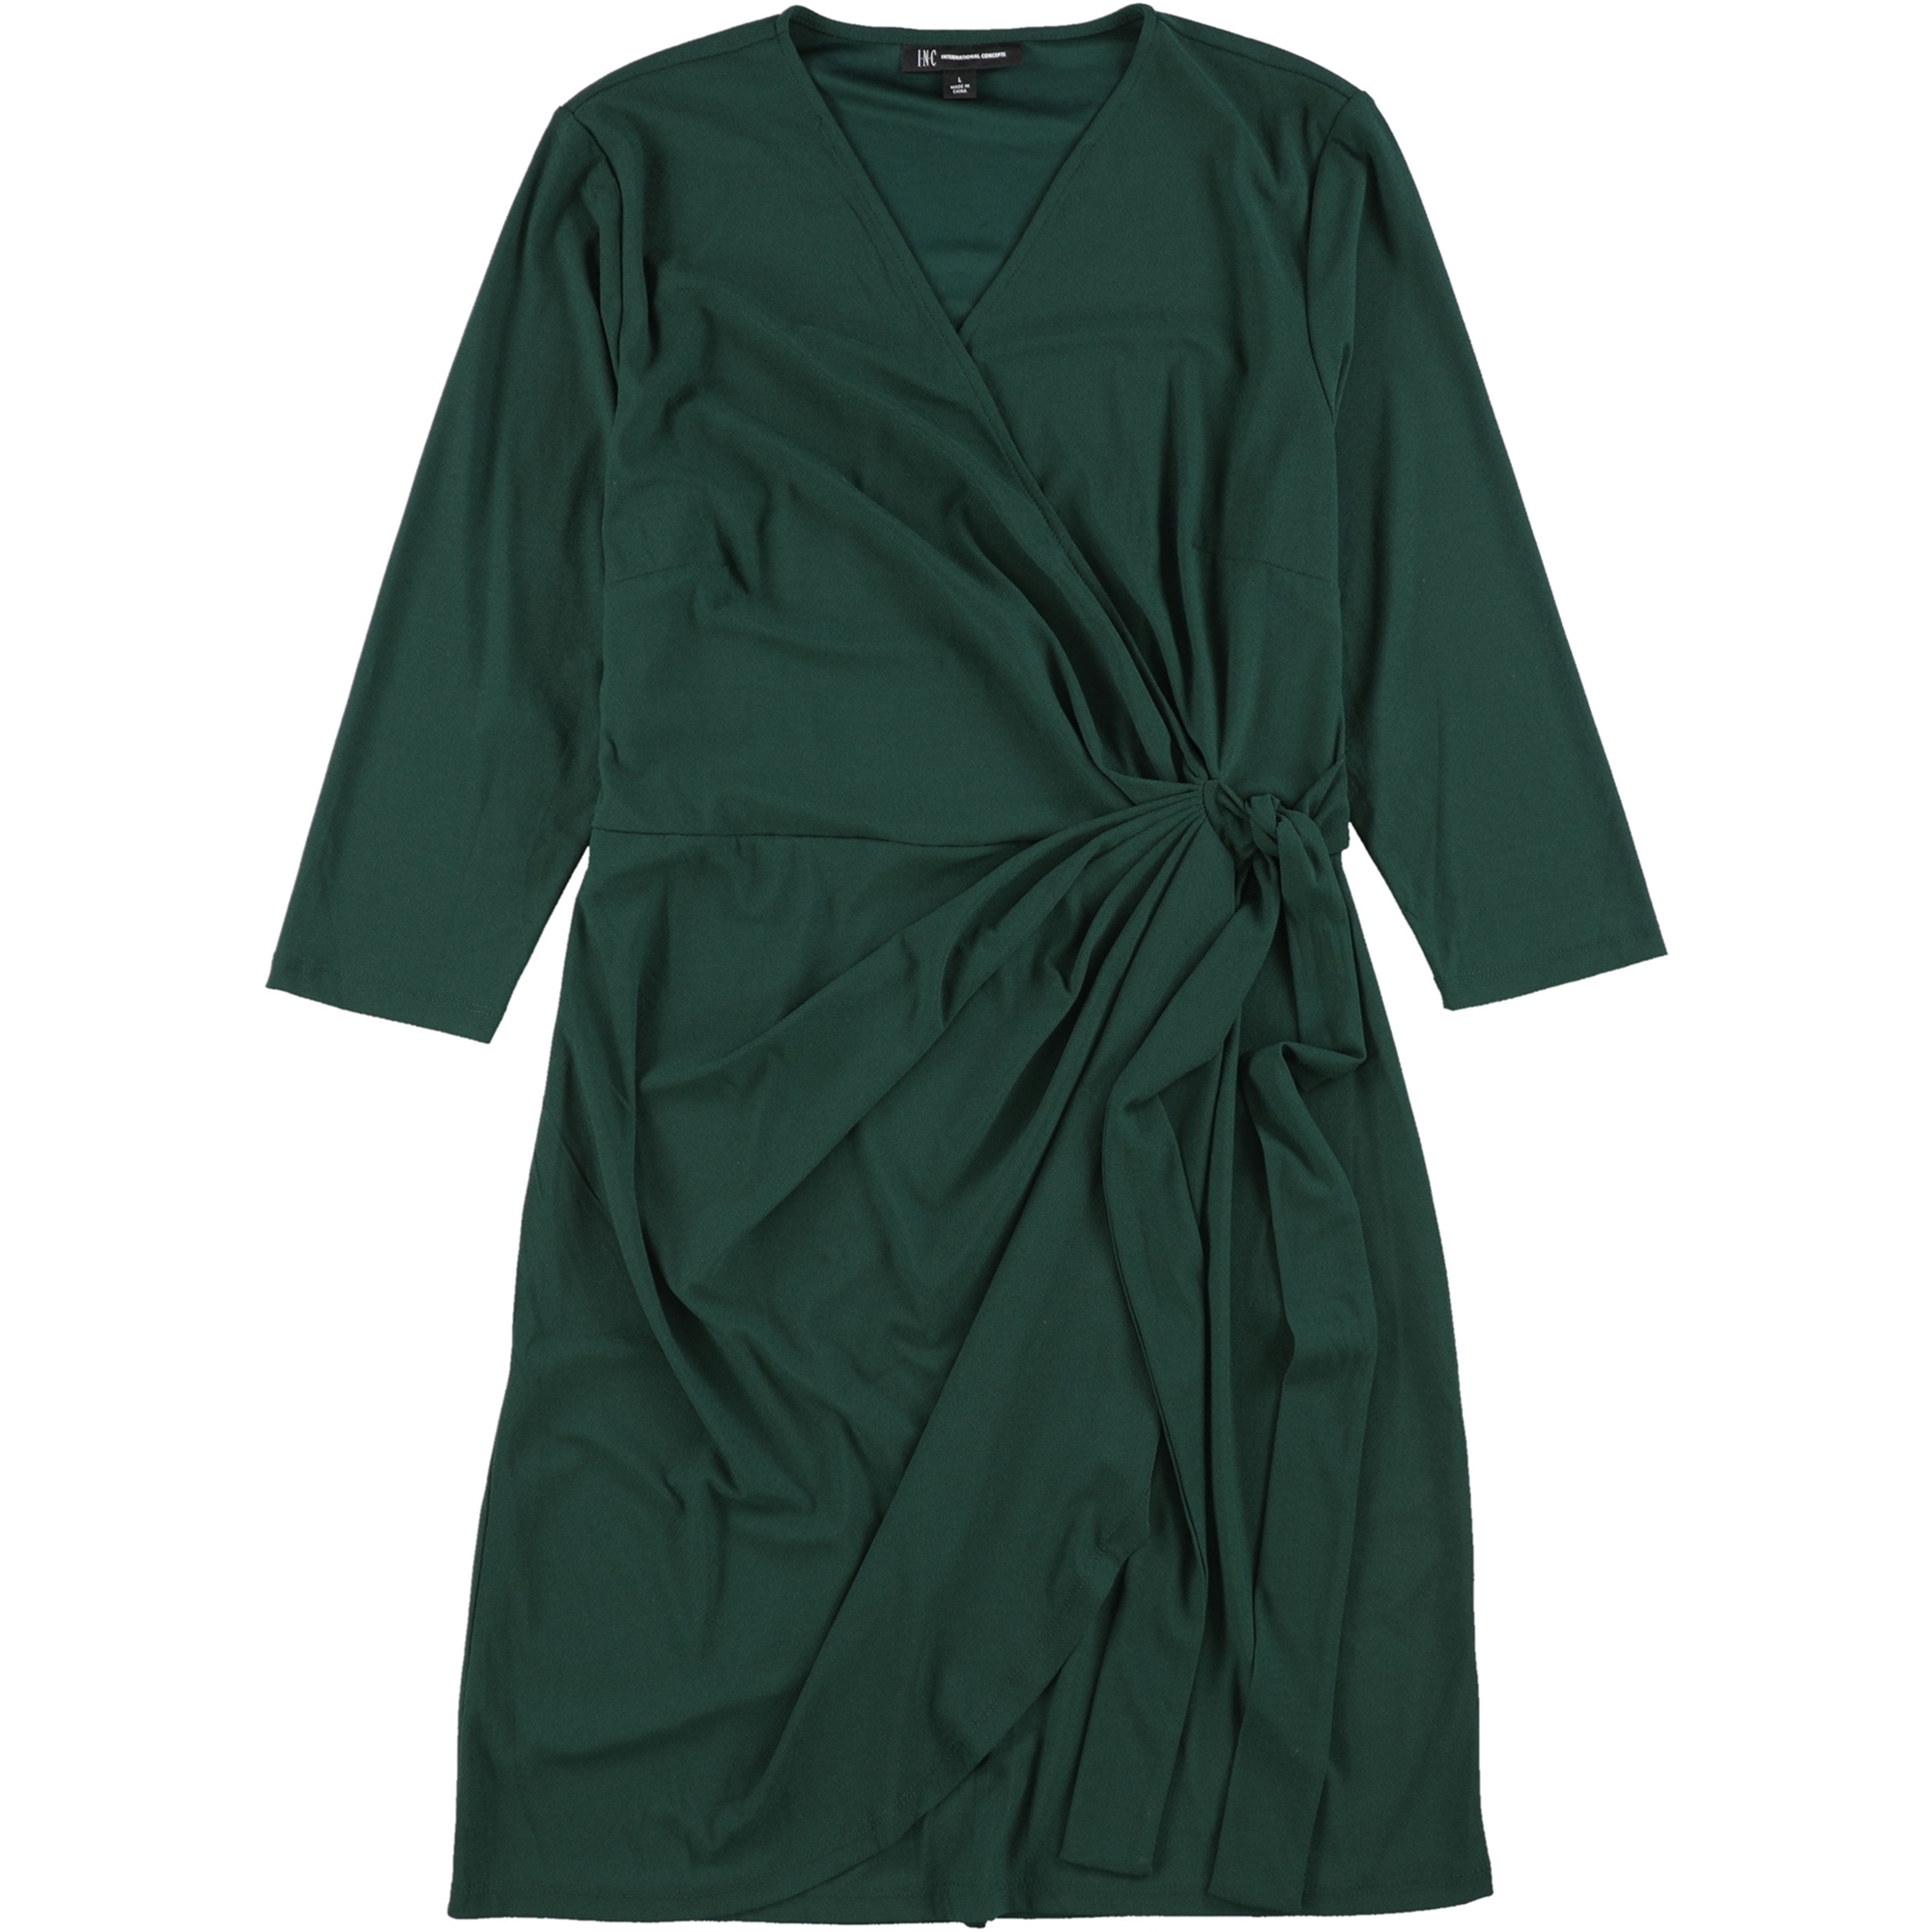 I-N-C Womens Solid Wrap Dress, Green, Large - image 1 of 1